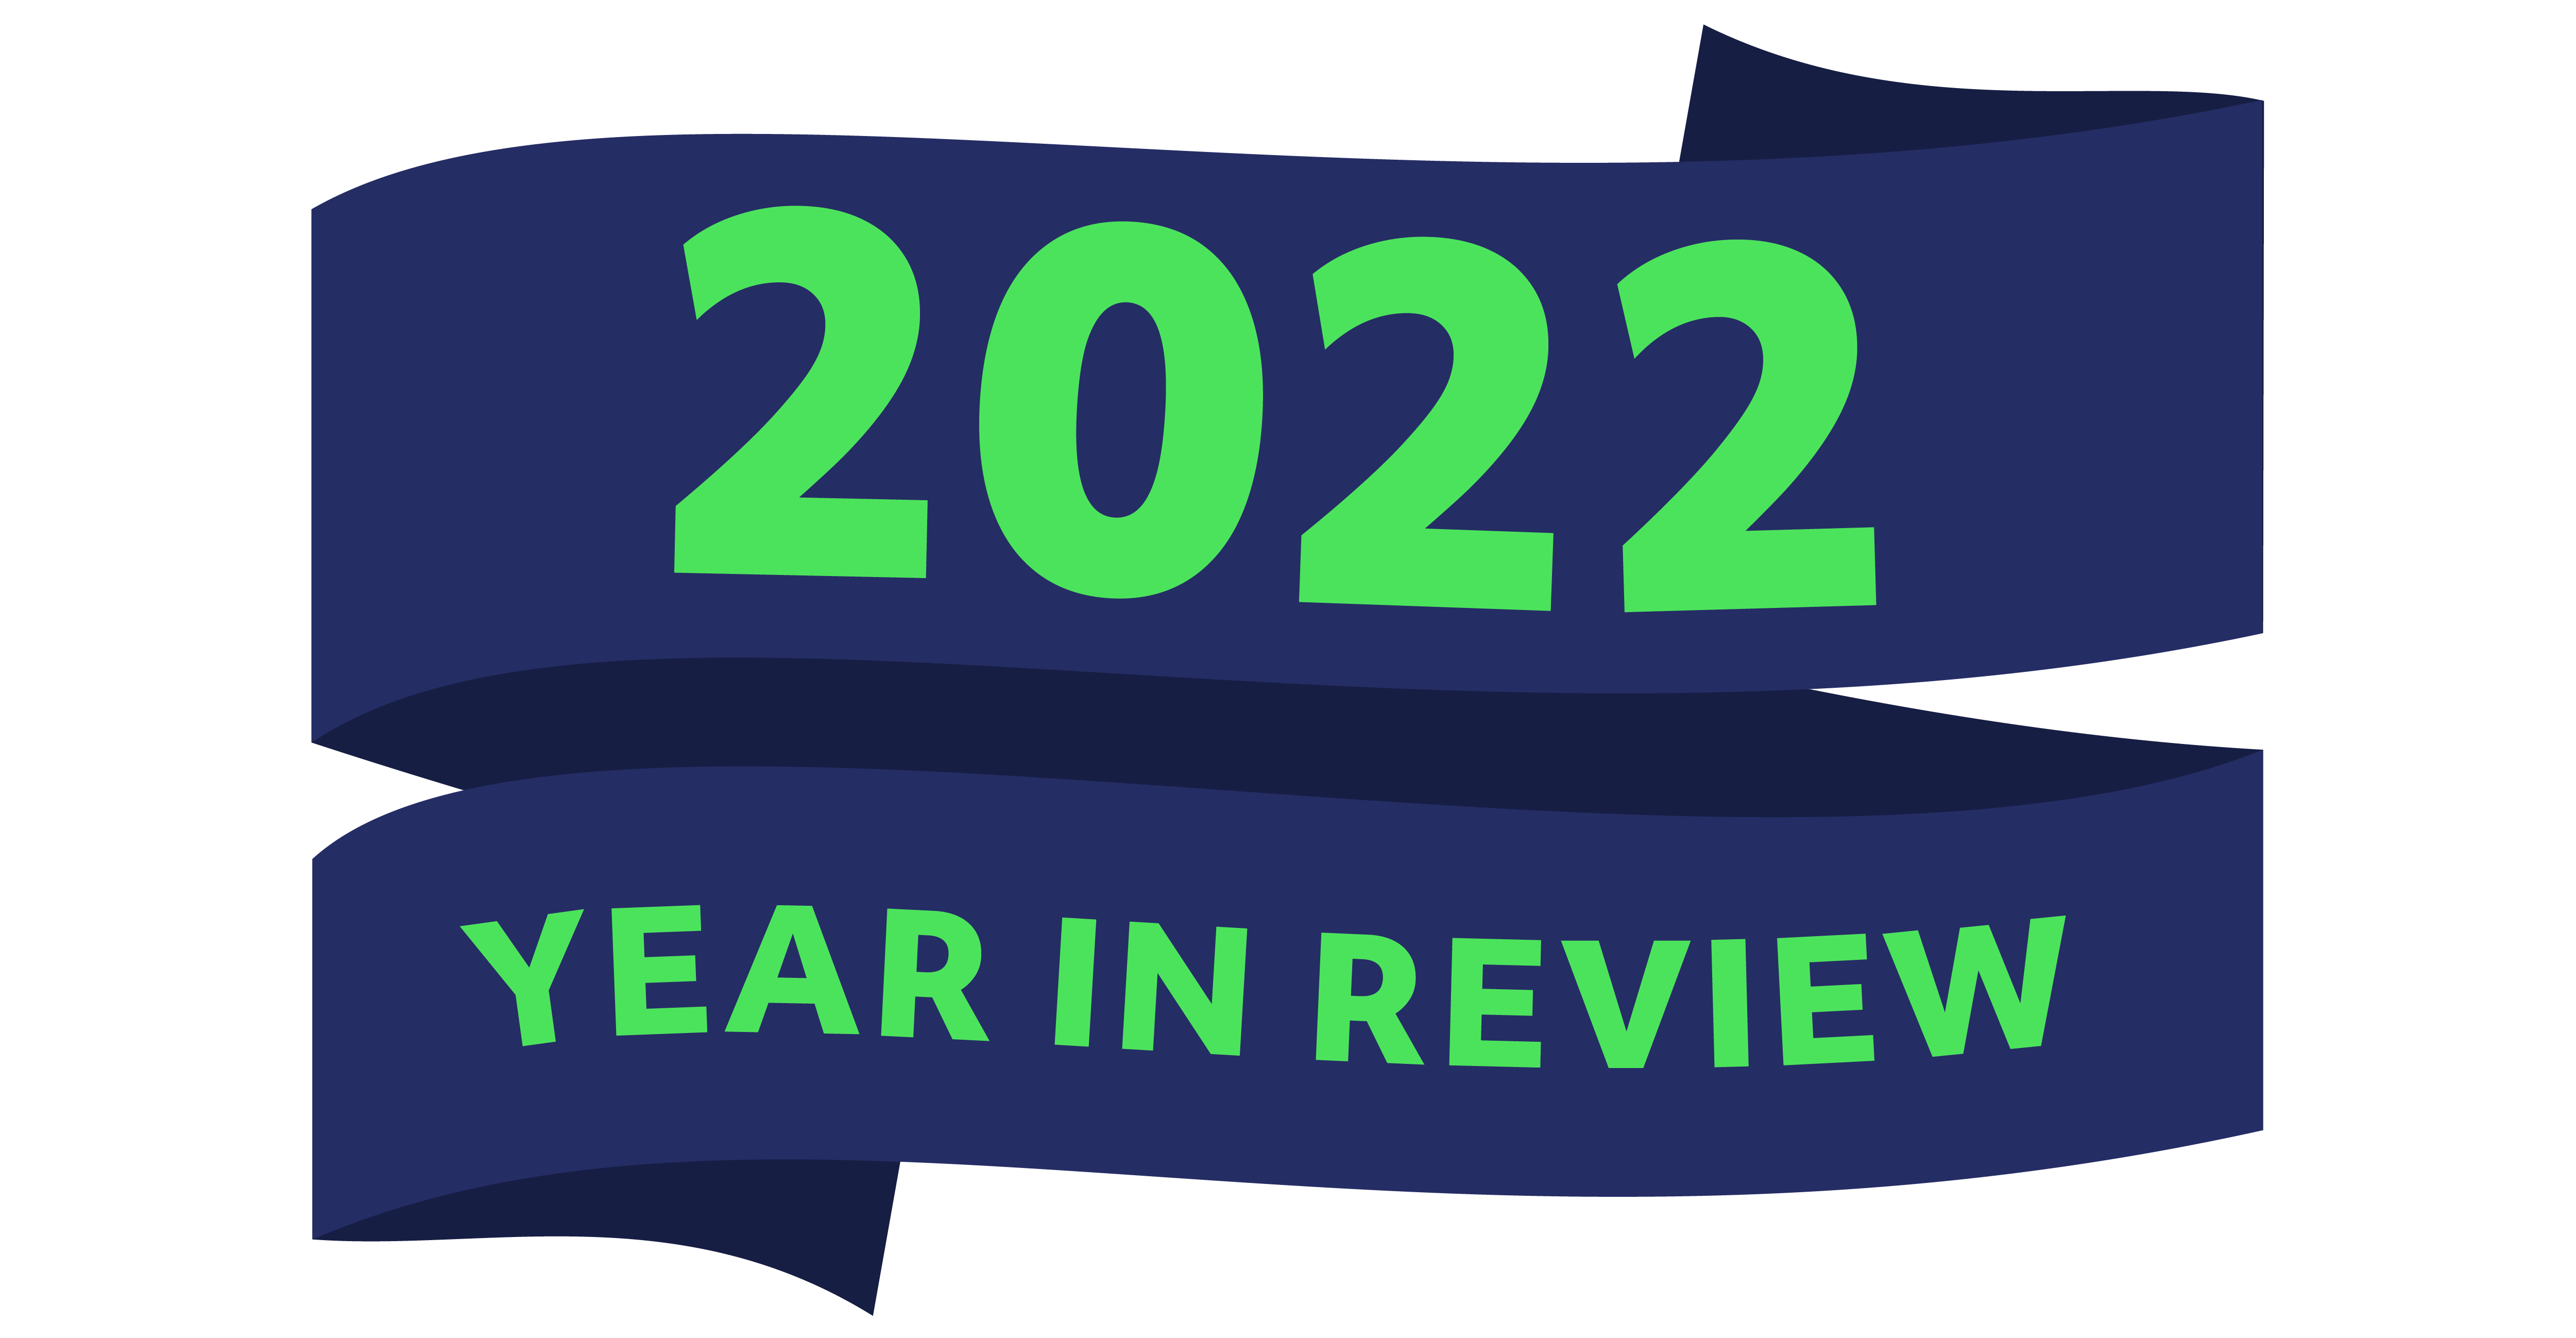 2022 Year in Review in neon green text on a navy ribbon banner.